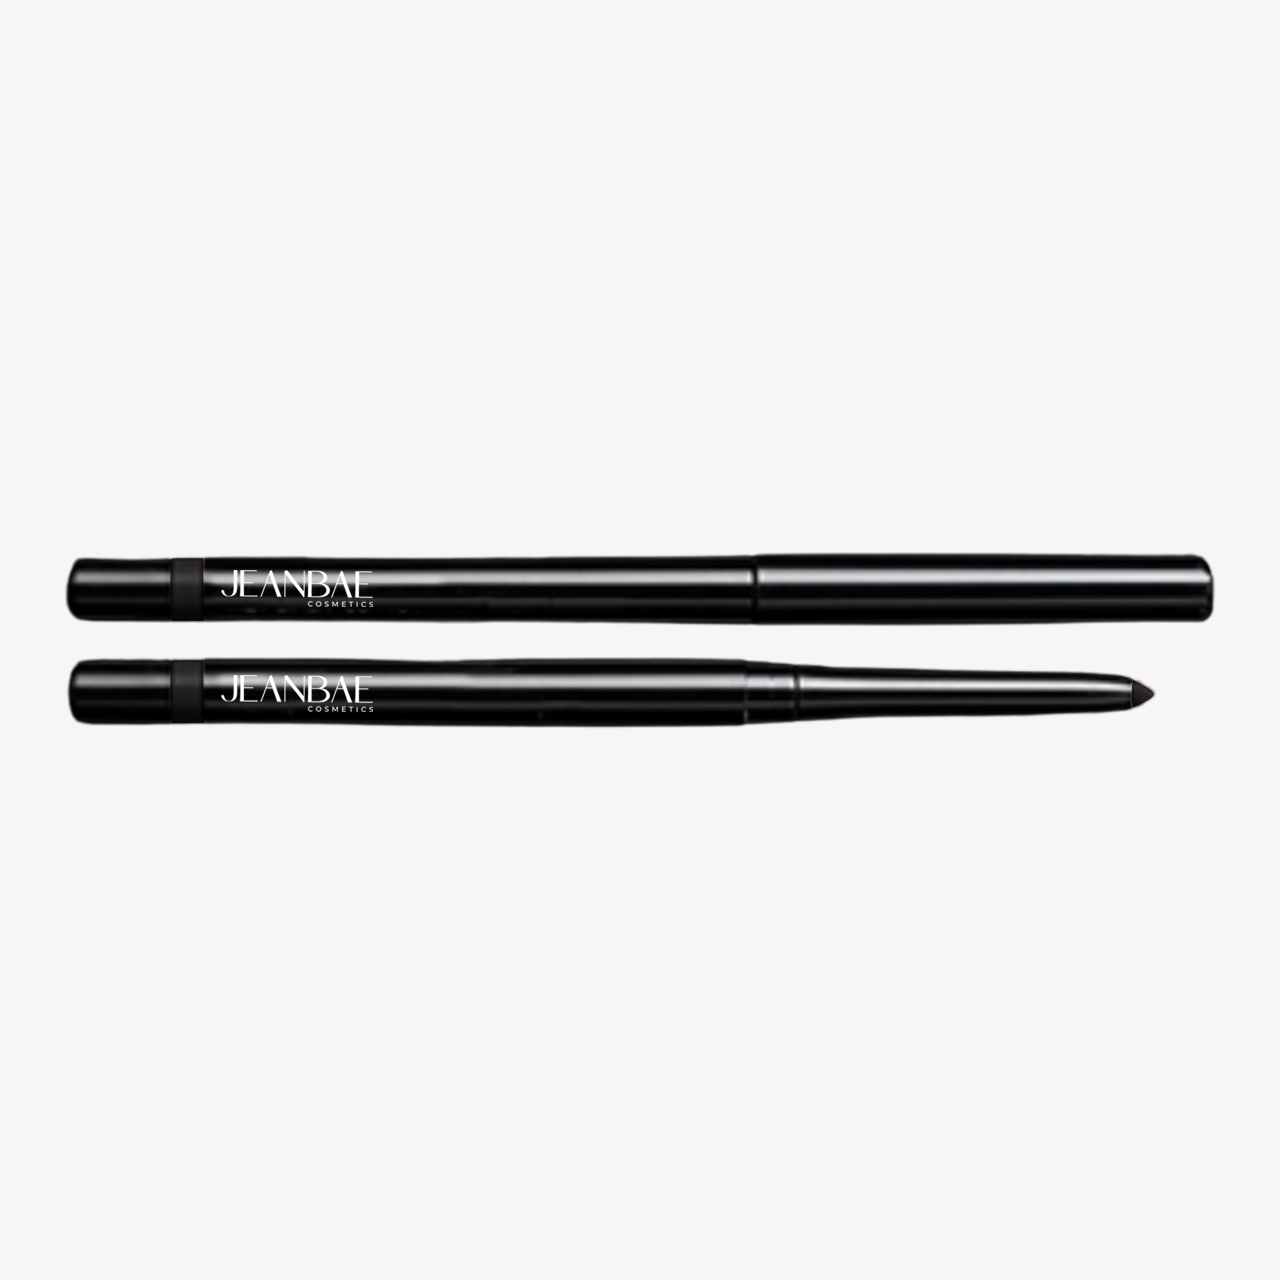 Super creamy water-resistant eyeliner with a mechanical roll-up that glides across eyelids.   THIS PRODUCT IS Cruelty-Free, Hypoallergenic, Non-Comedogenic, Halal Certified, and EU Compliant. Free of Parabens and Fragrances.